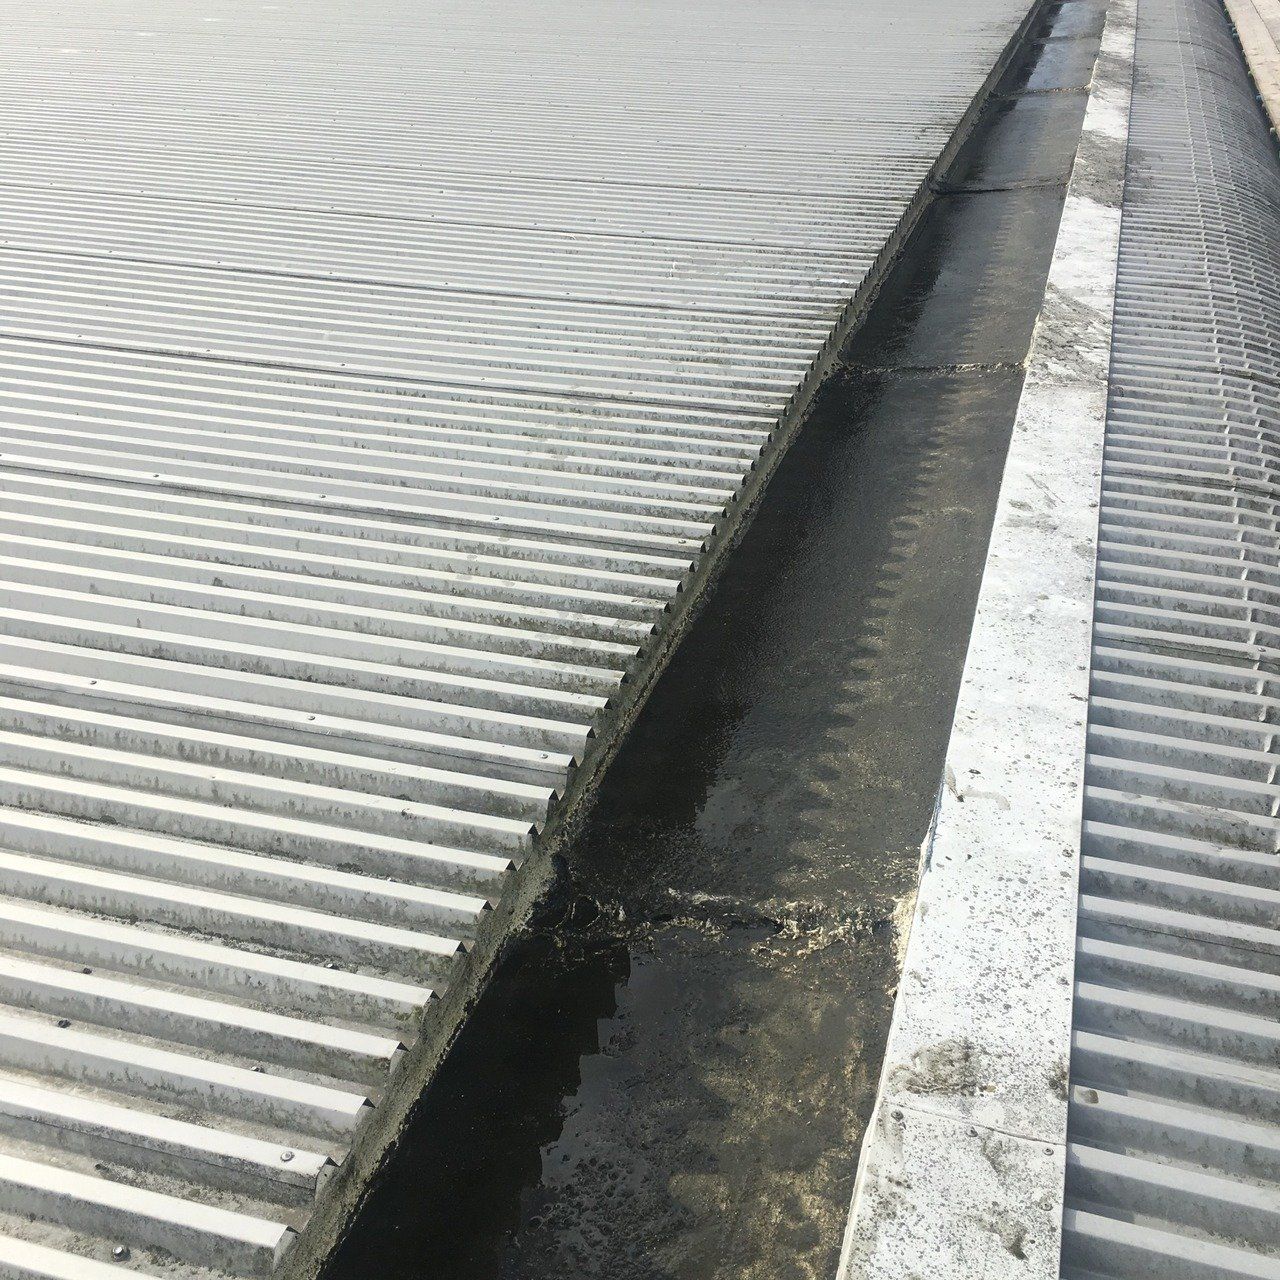 Gutter repair and maintenance services for commercial and industrial properties